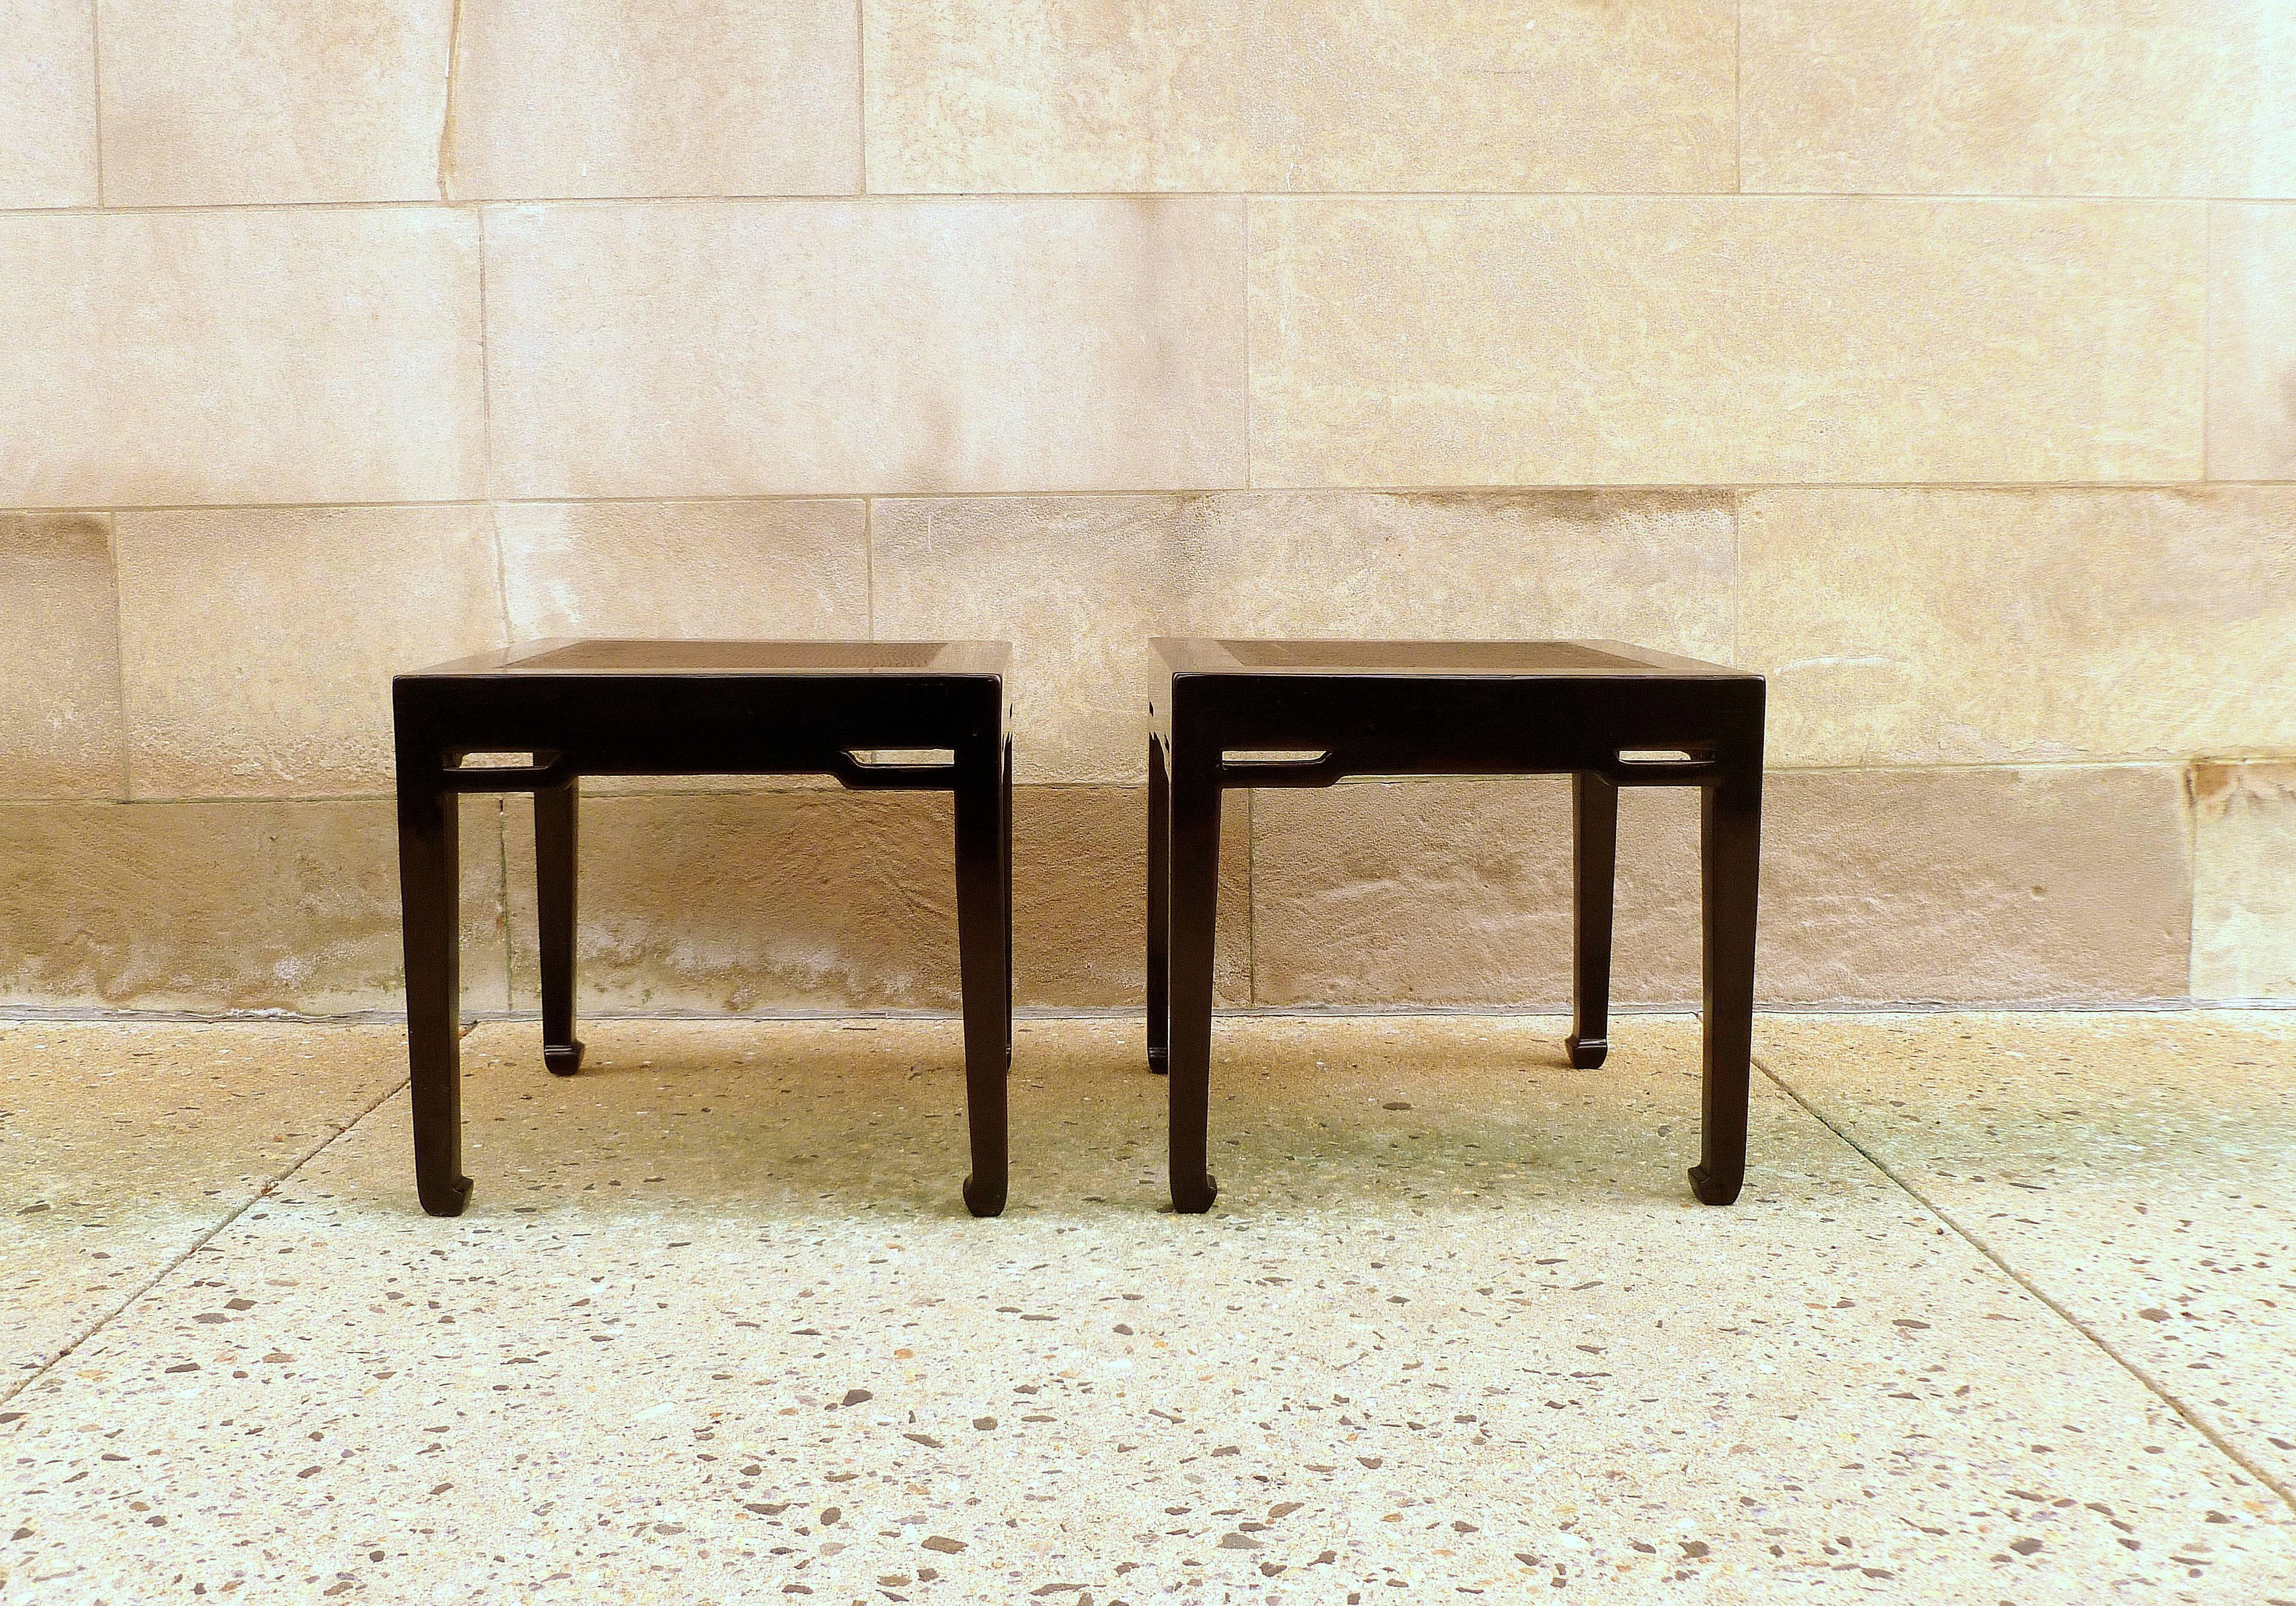 Pair of black lacquer end tables with hard canned top, simple and elegant black lacquer end tables.